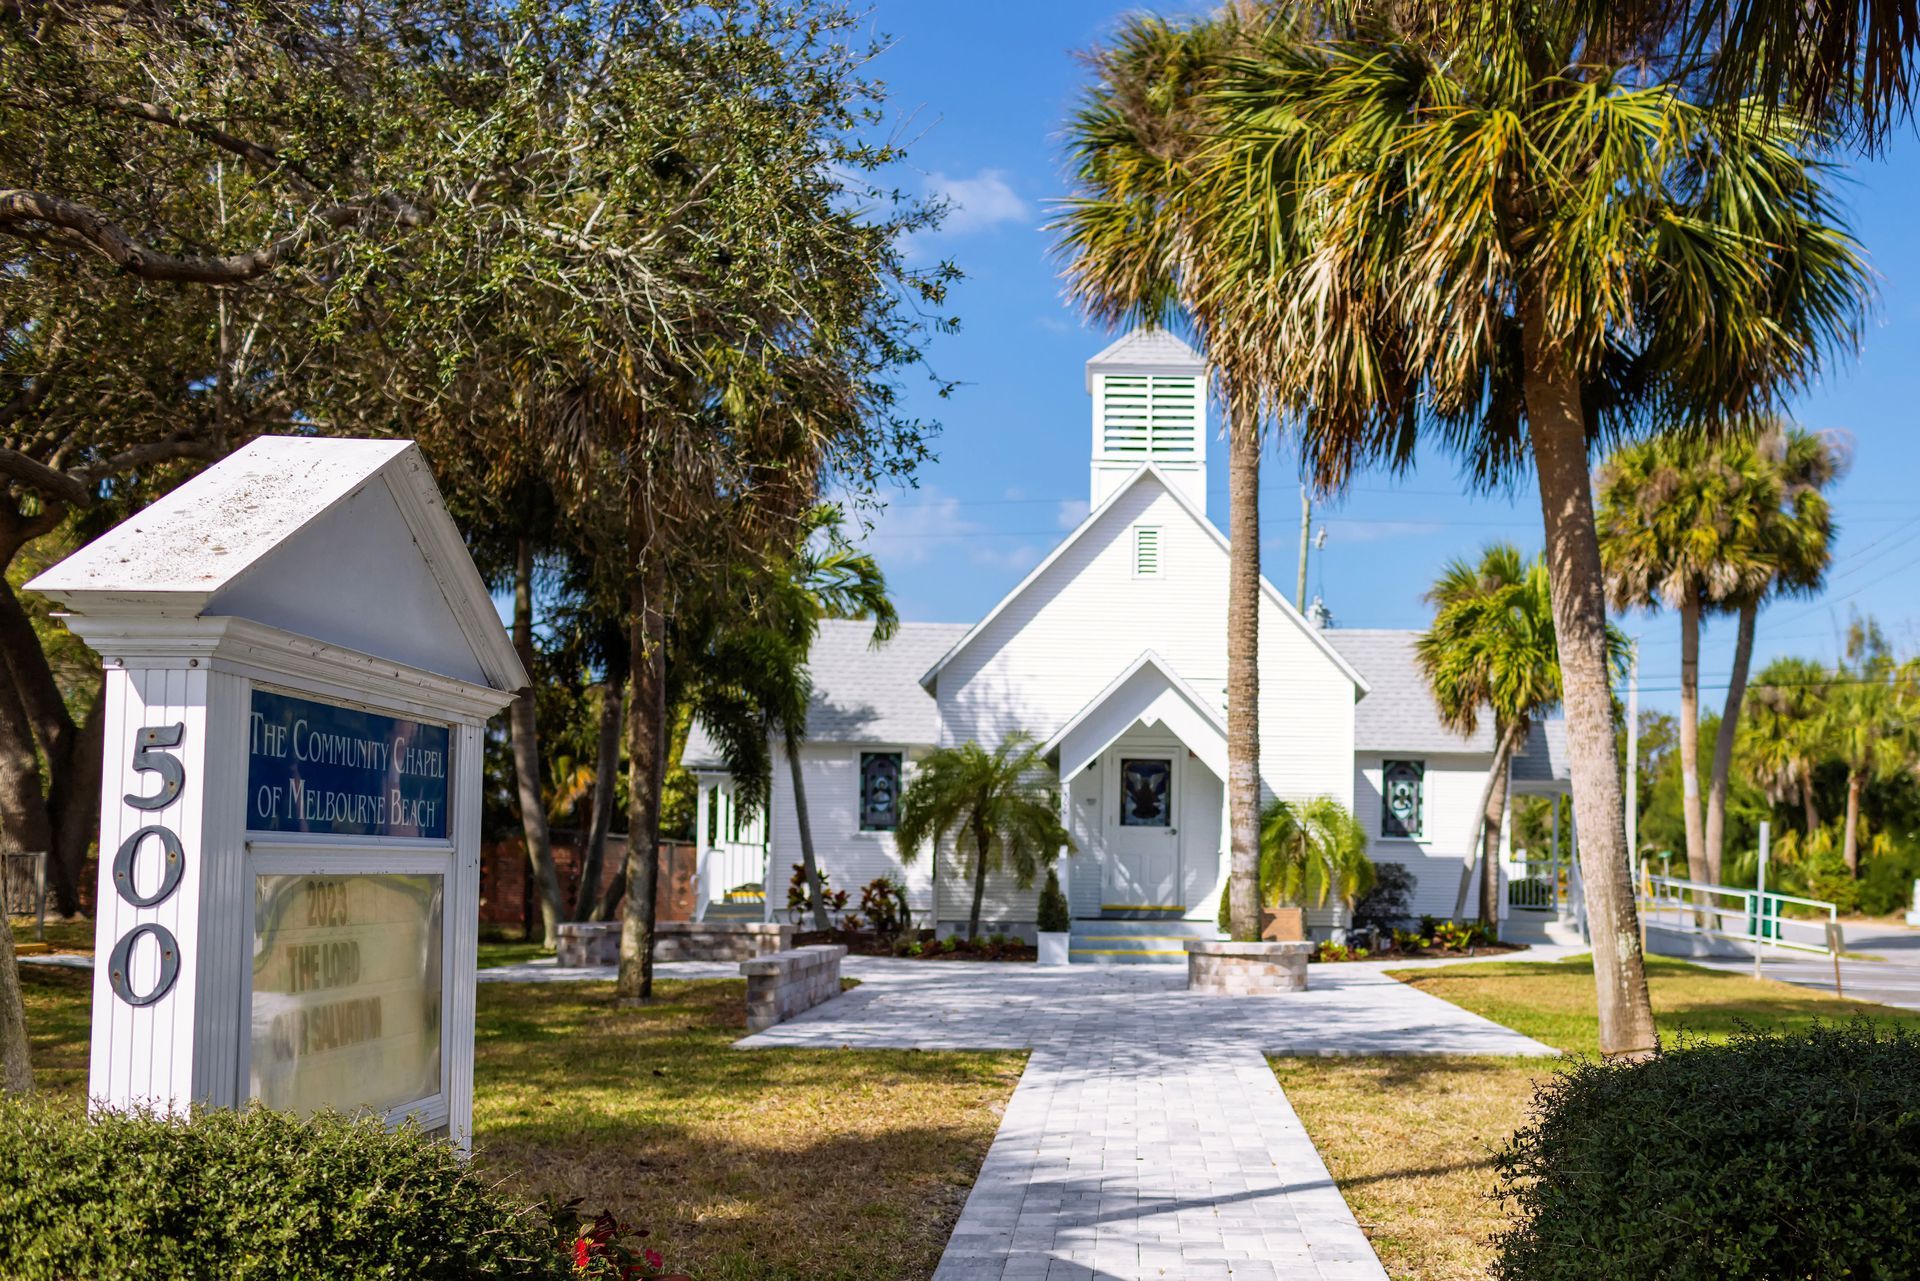 A white church with palm trees in front of it